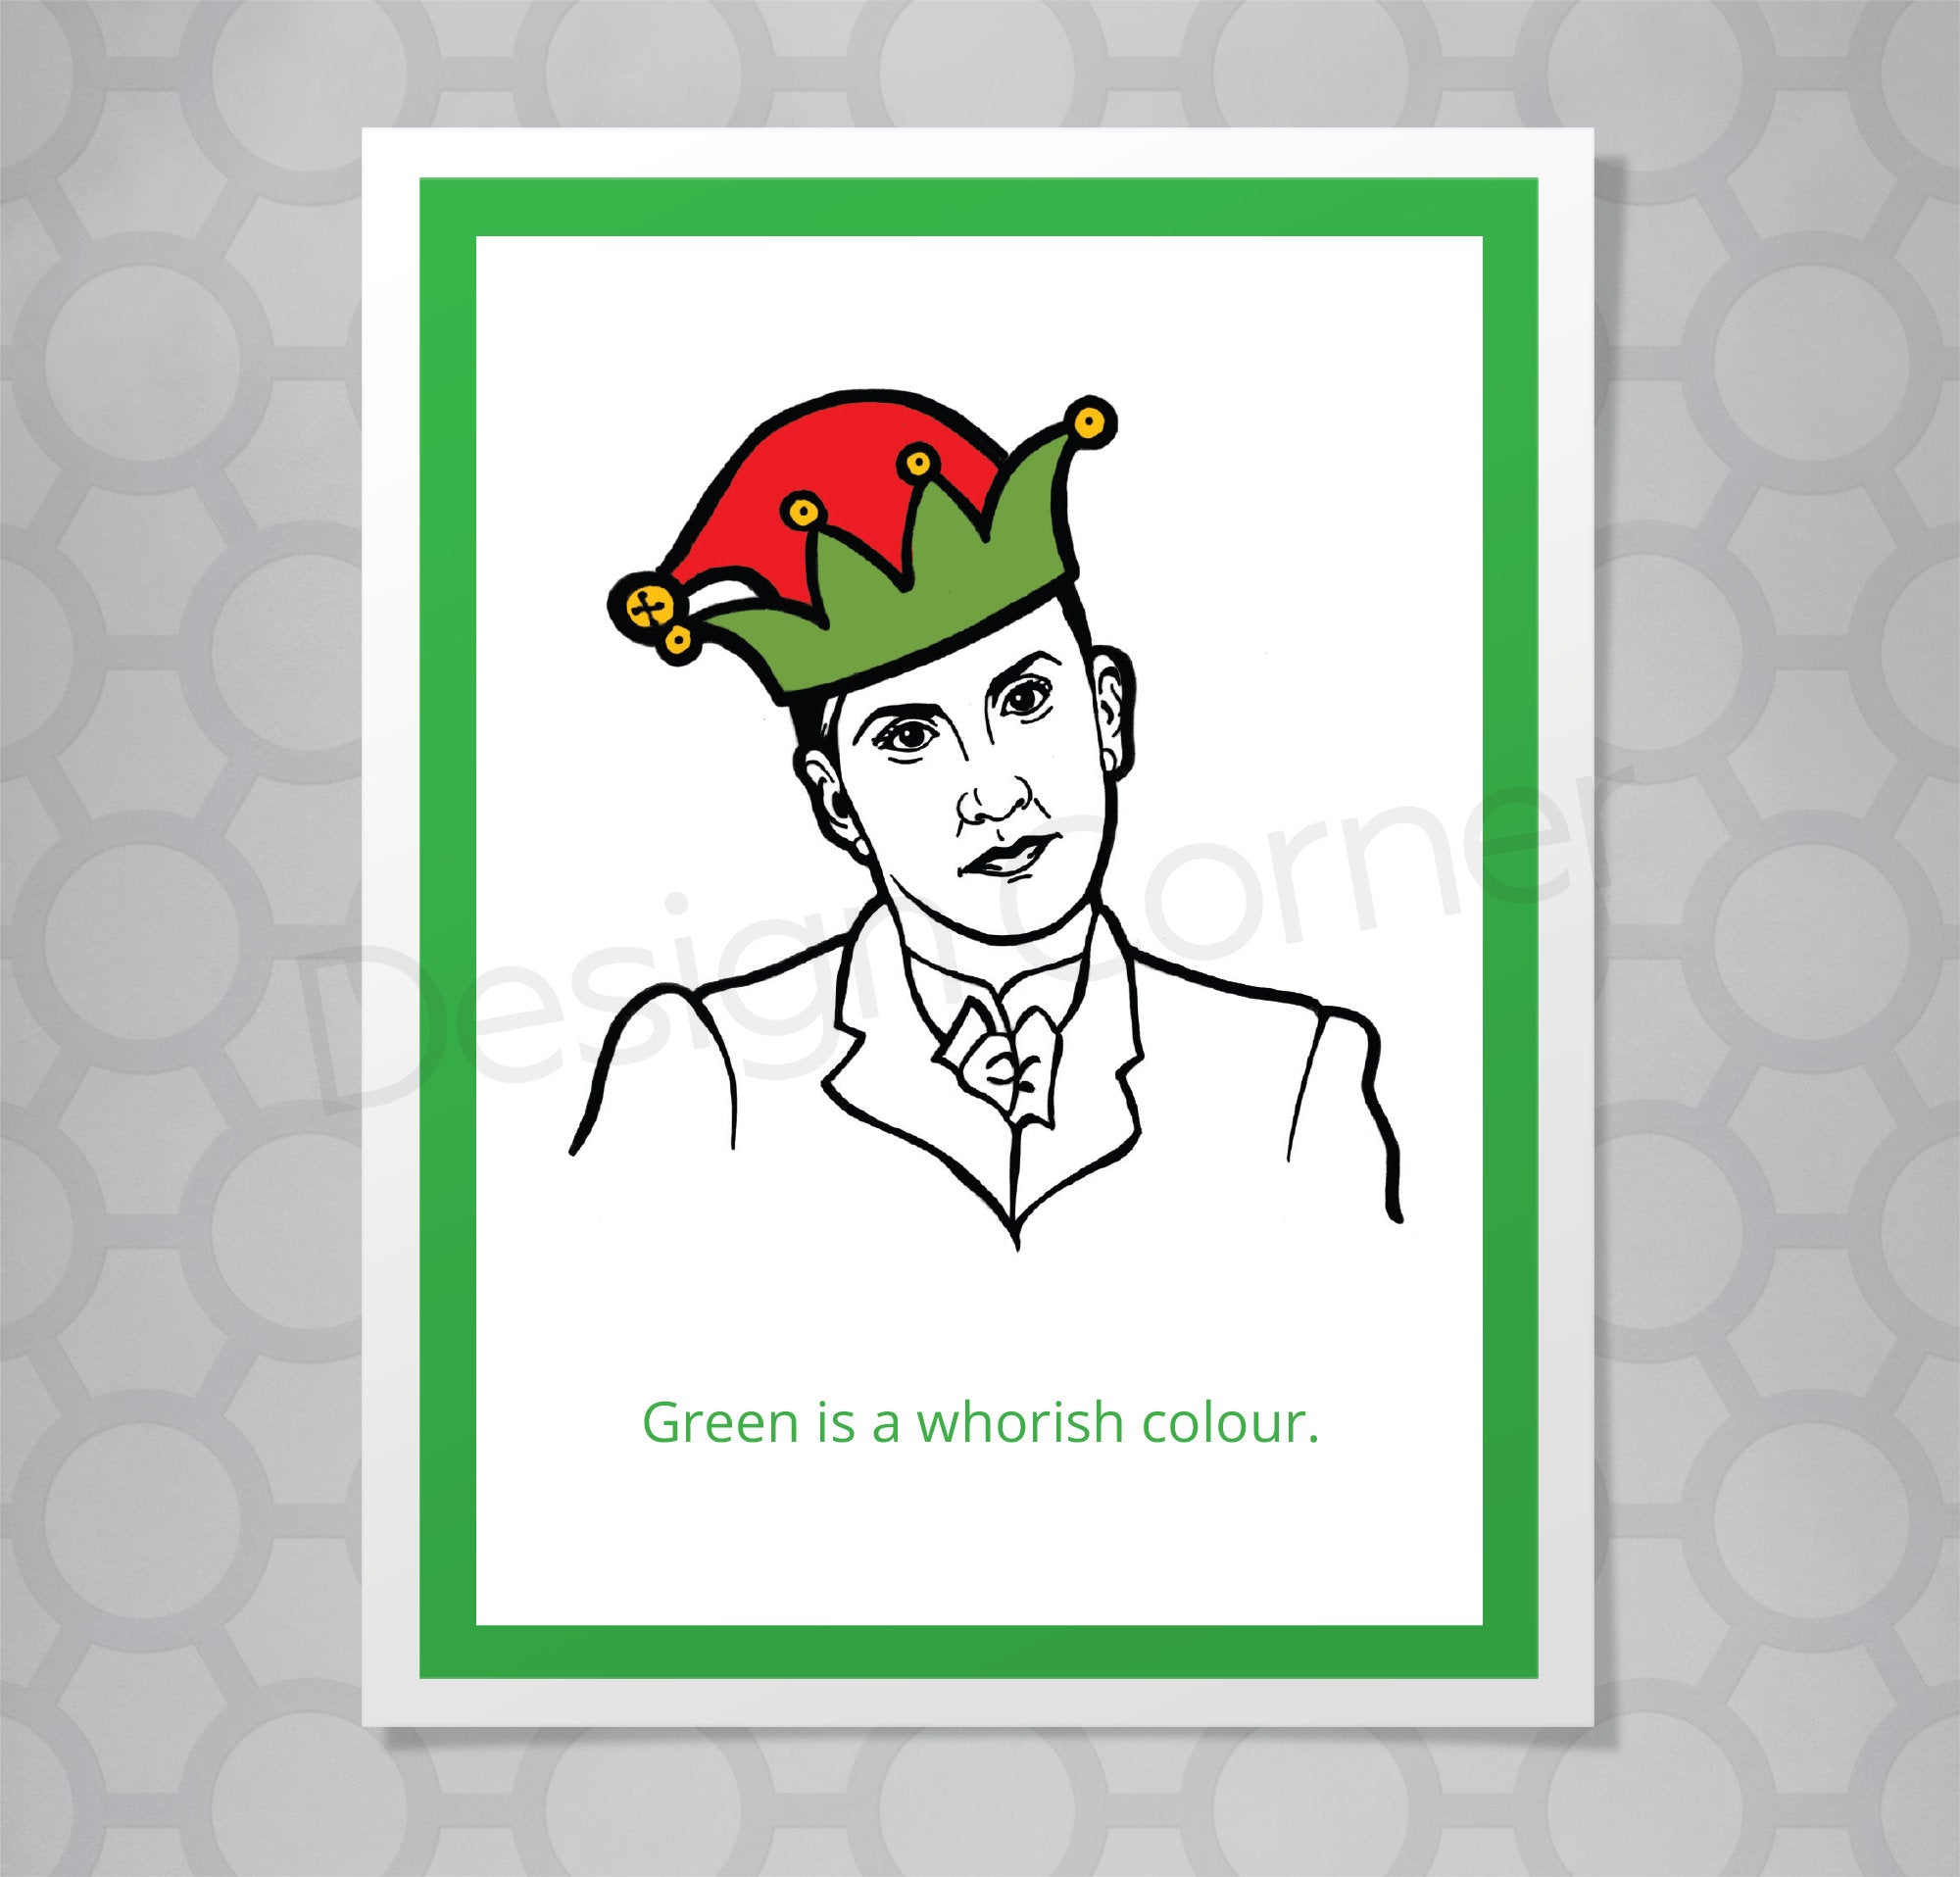 Christmas card with illustration of The Office Angela with elf hat on. Caption says "Green is a whorish colour. "